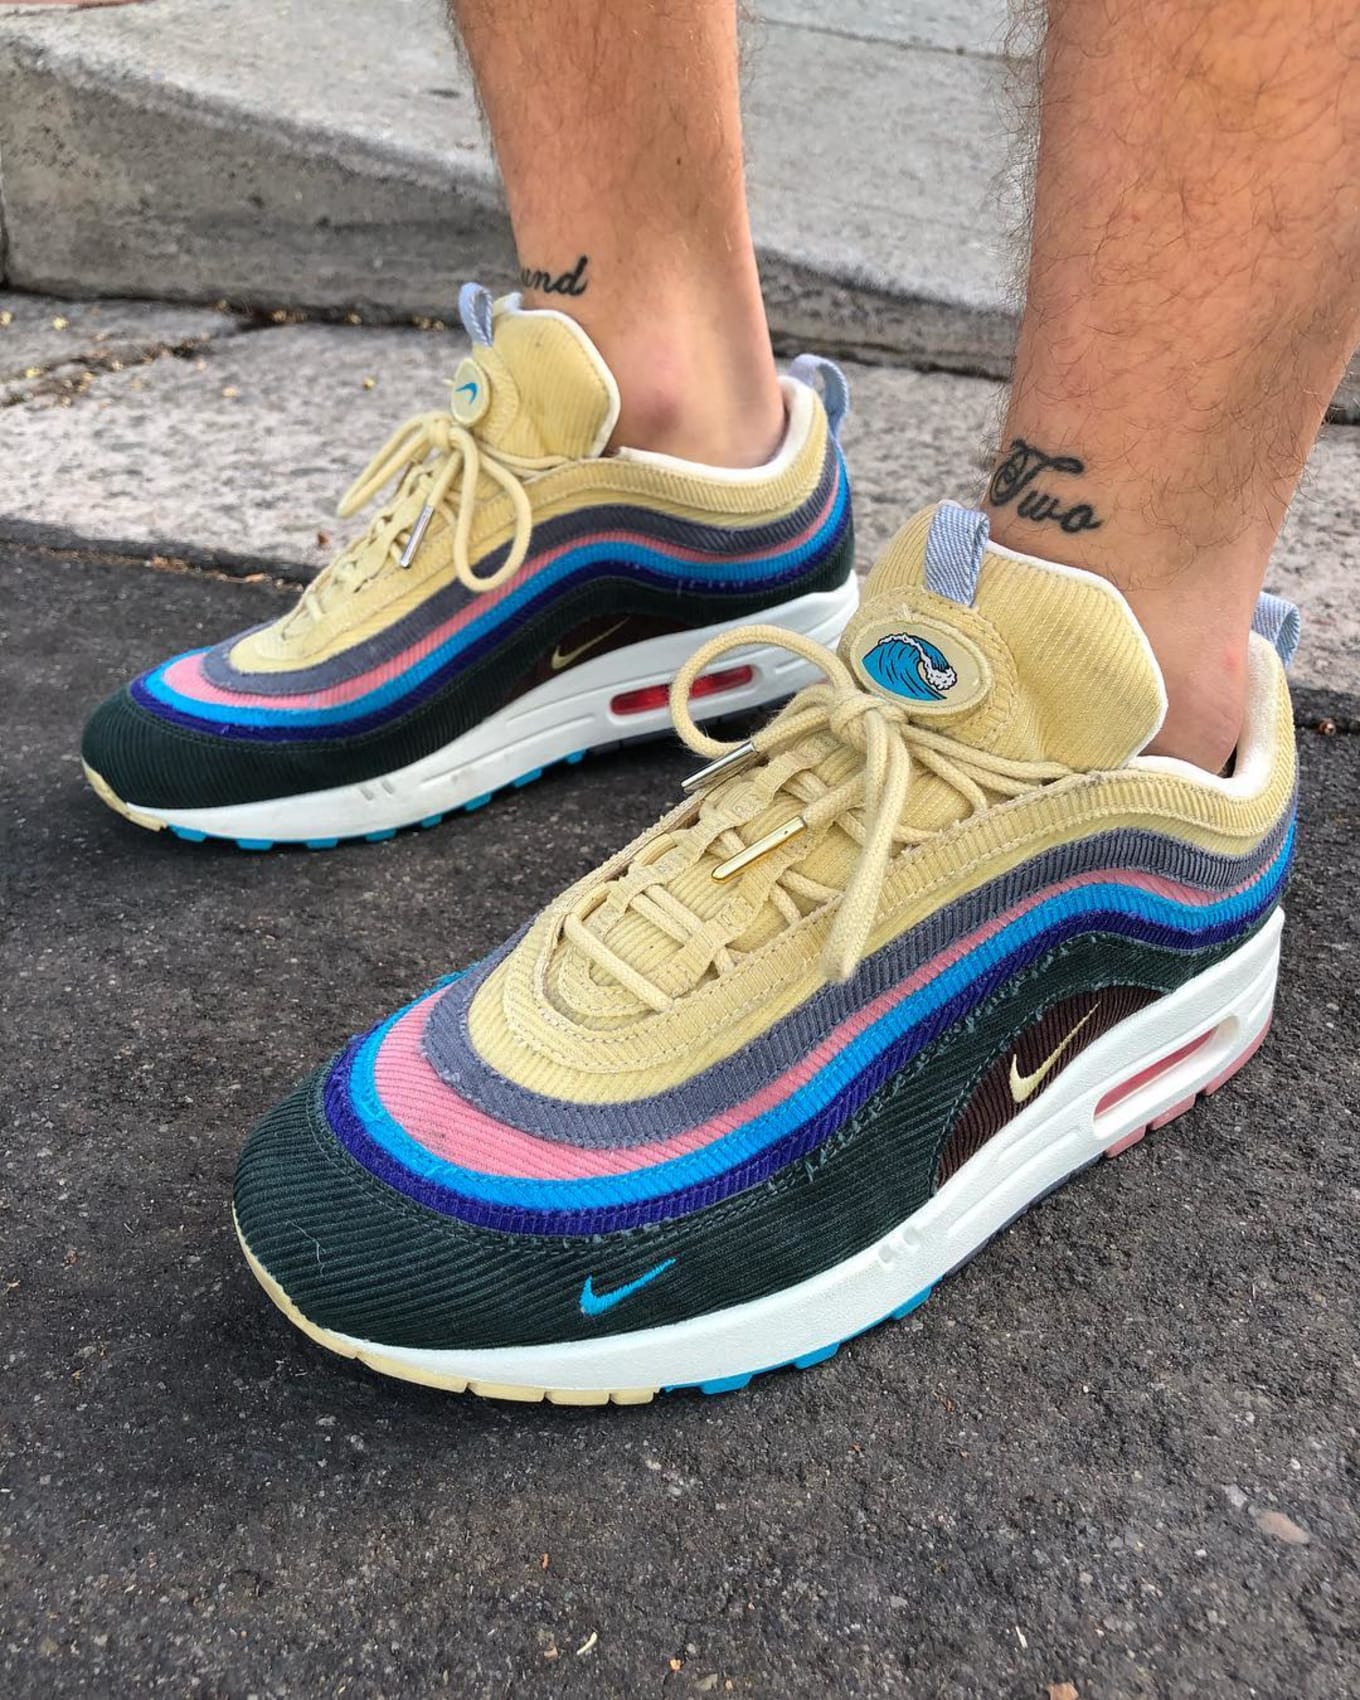 Frontera Comerciante itinerante grado Sean Wotherspoon Nike Air Max 97 x Air Max 1 Hybrid Release Date | Sole  Collector